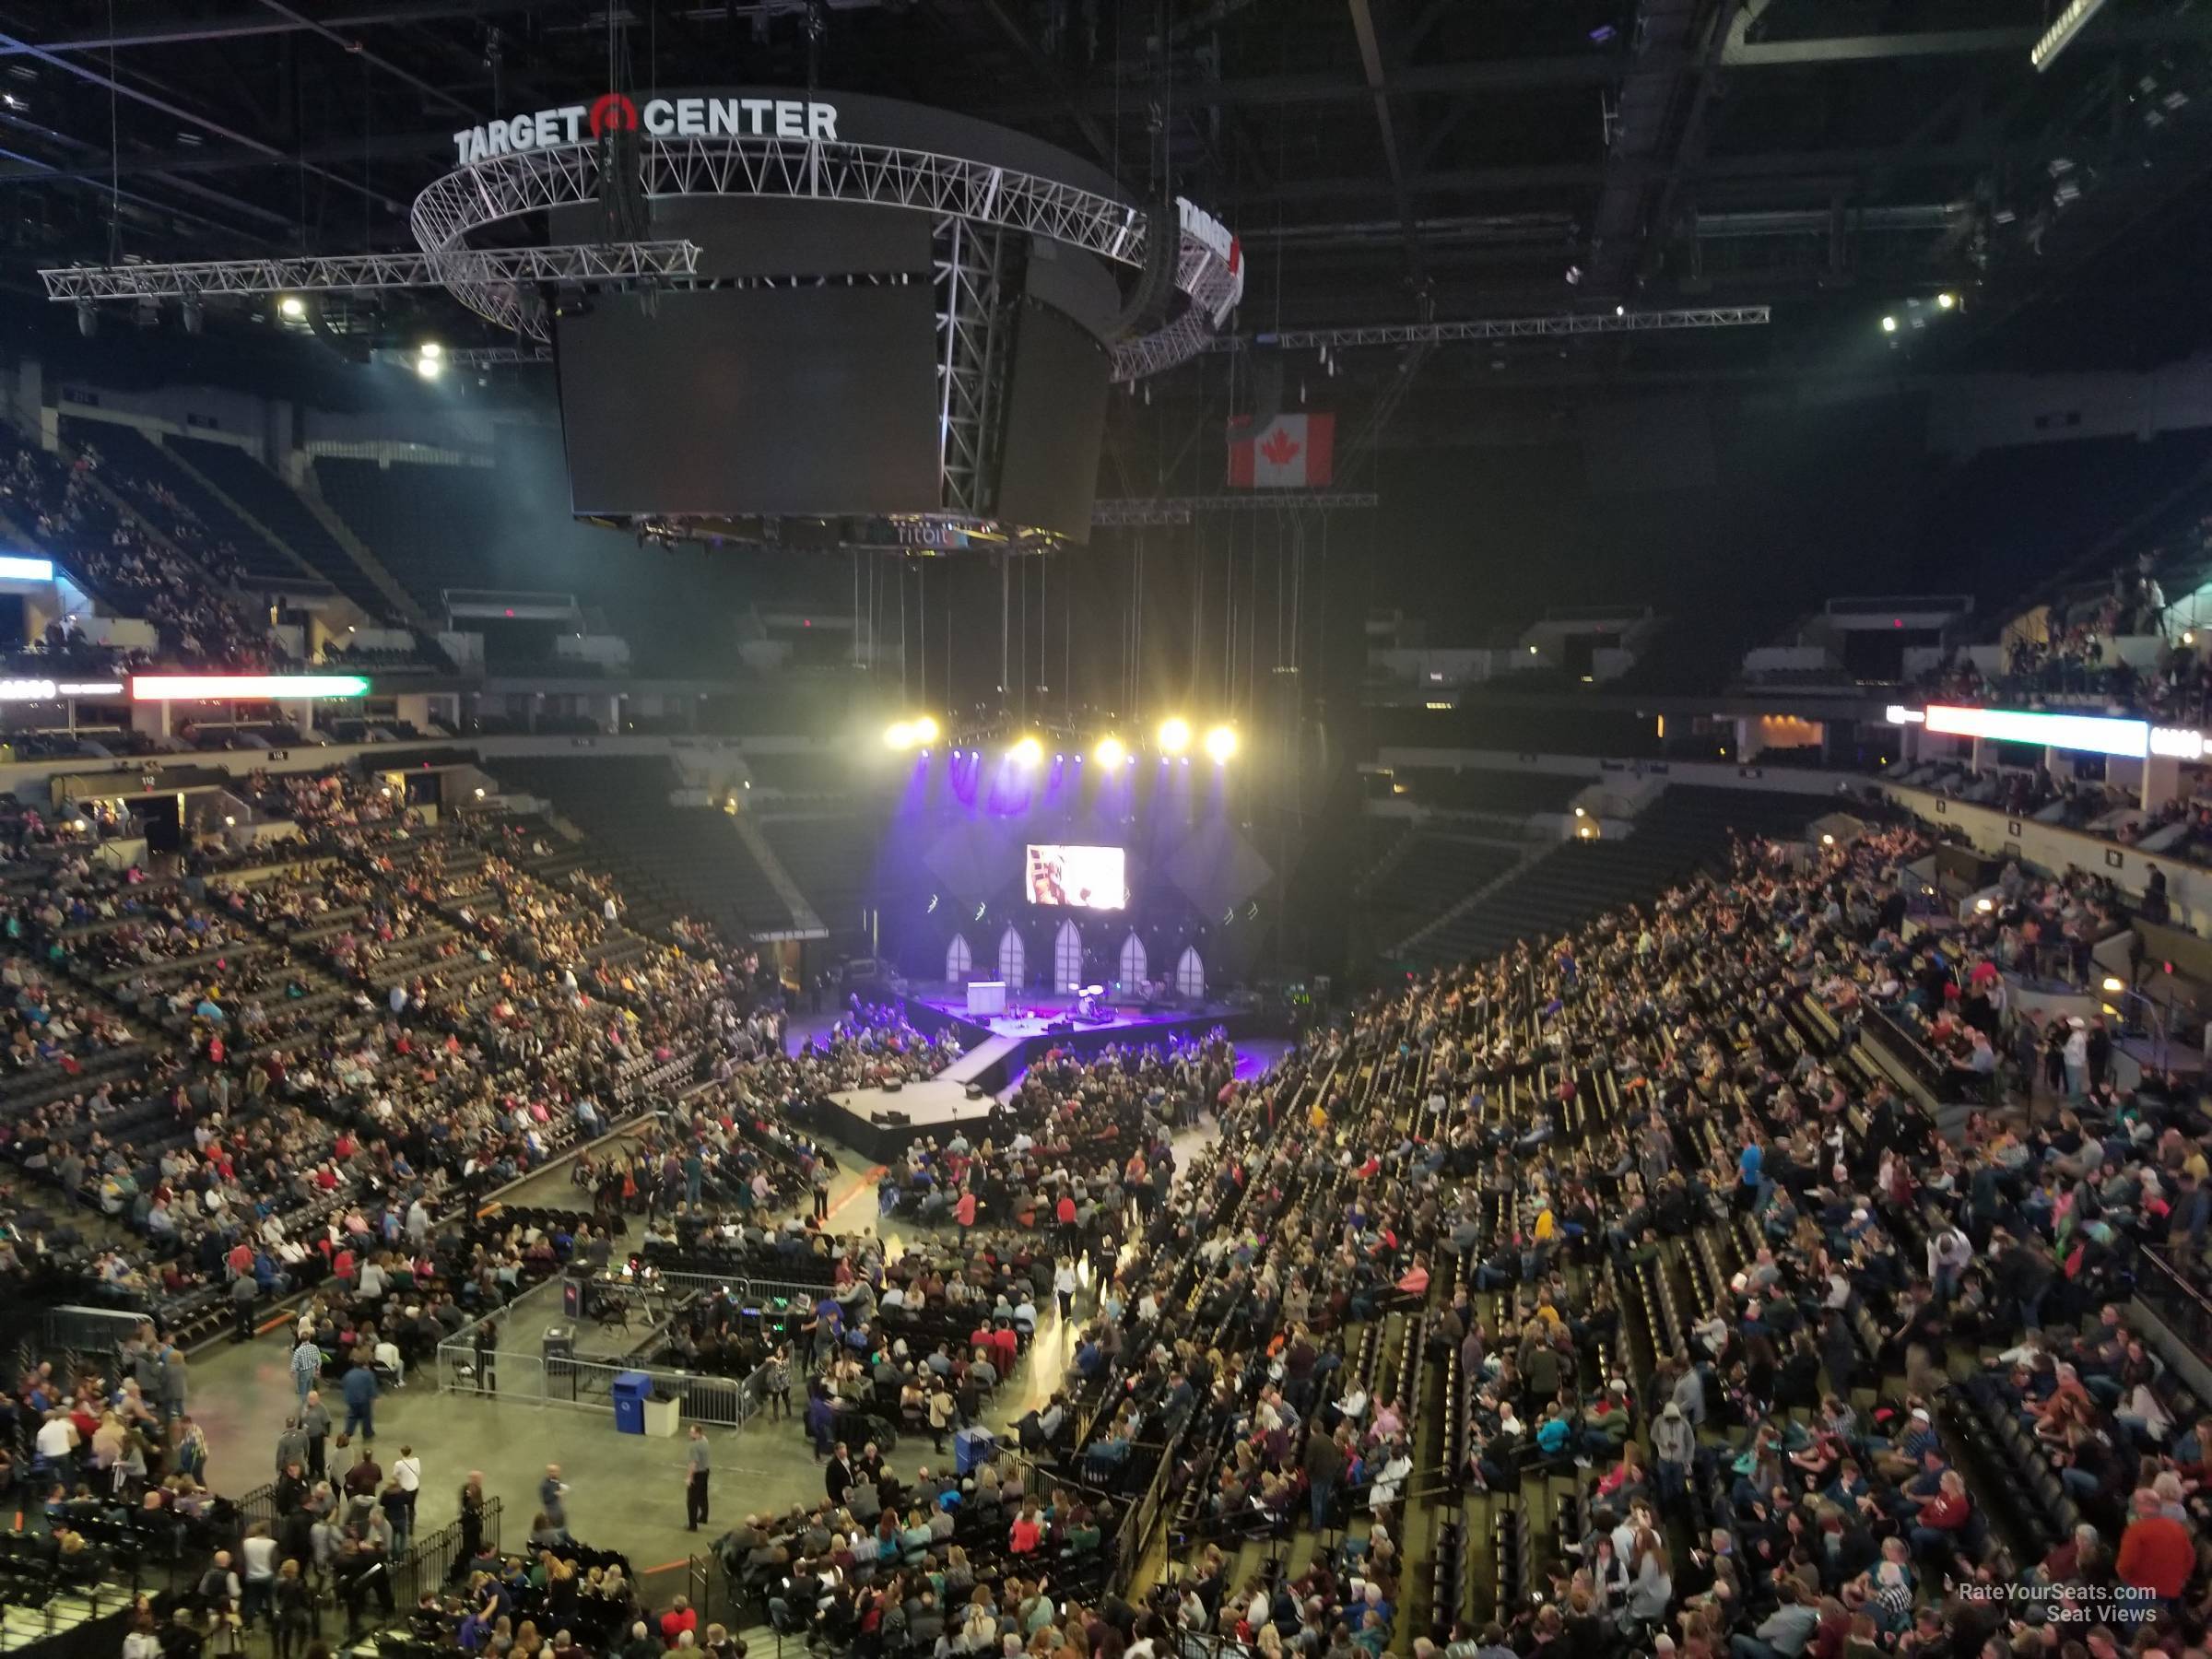 Target Center Section 238 Concert Seating - RateYourSeats.com